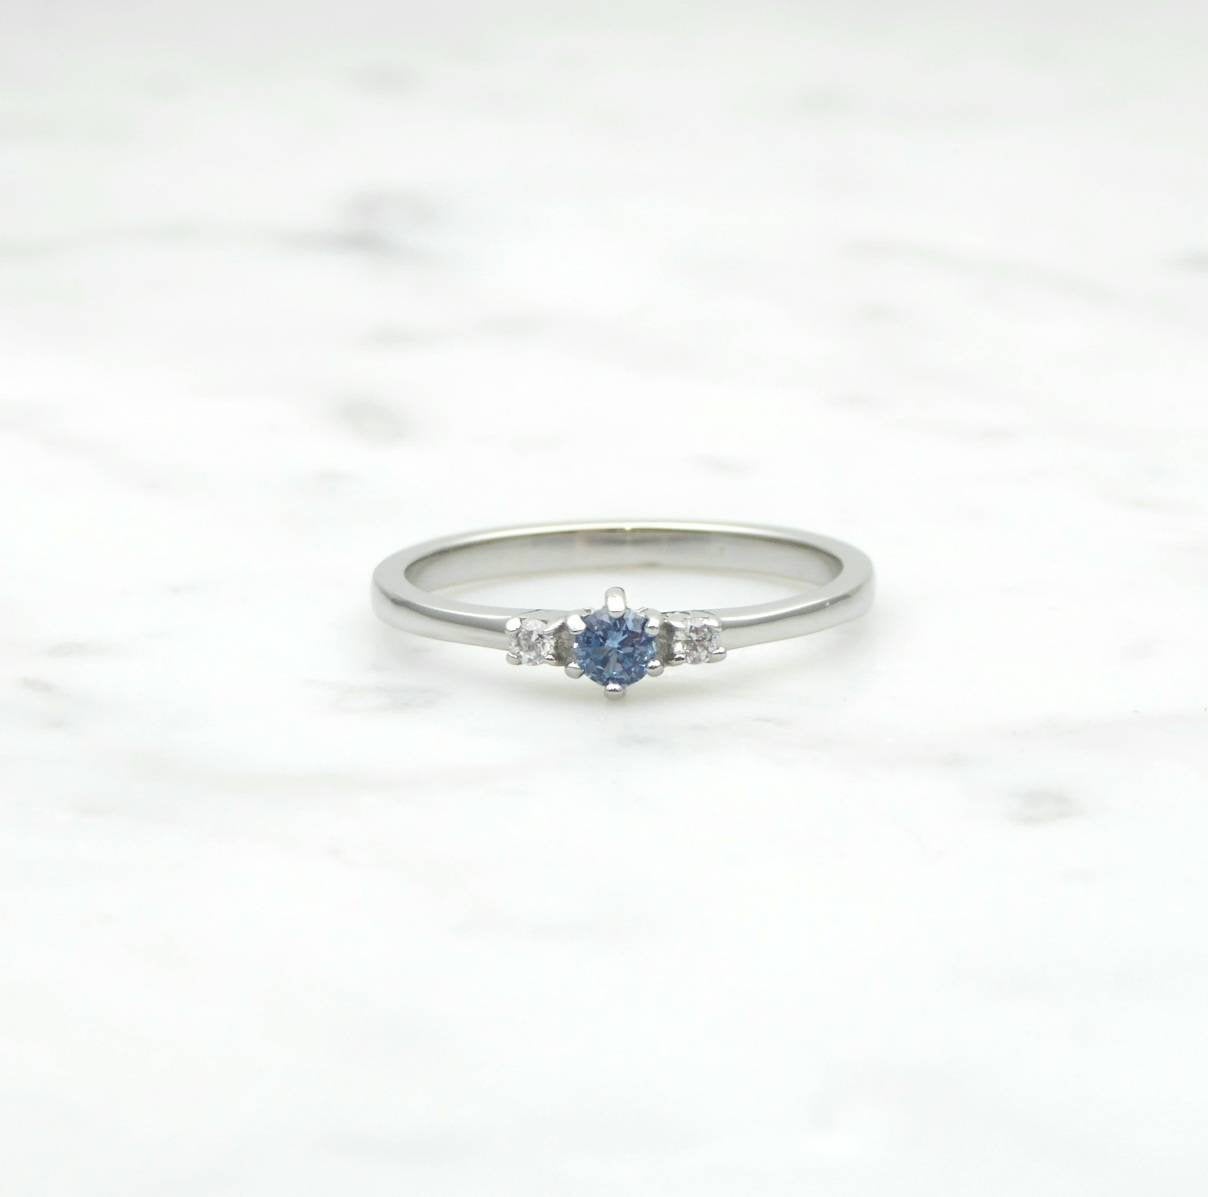 Natural Aquamarine and White Sapphire 3 stone Trilogy Ring in White Gold or Titanium  - engagement ring - handmade ring